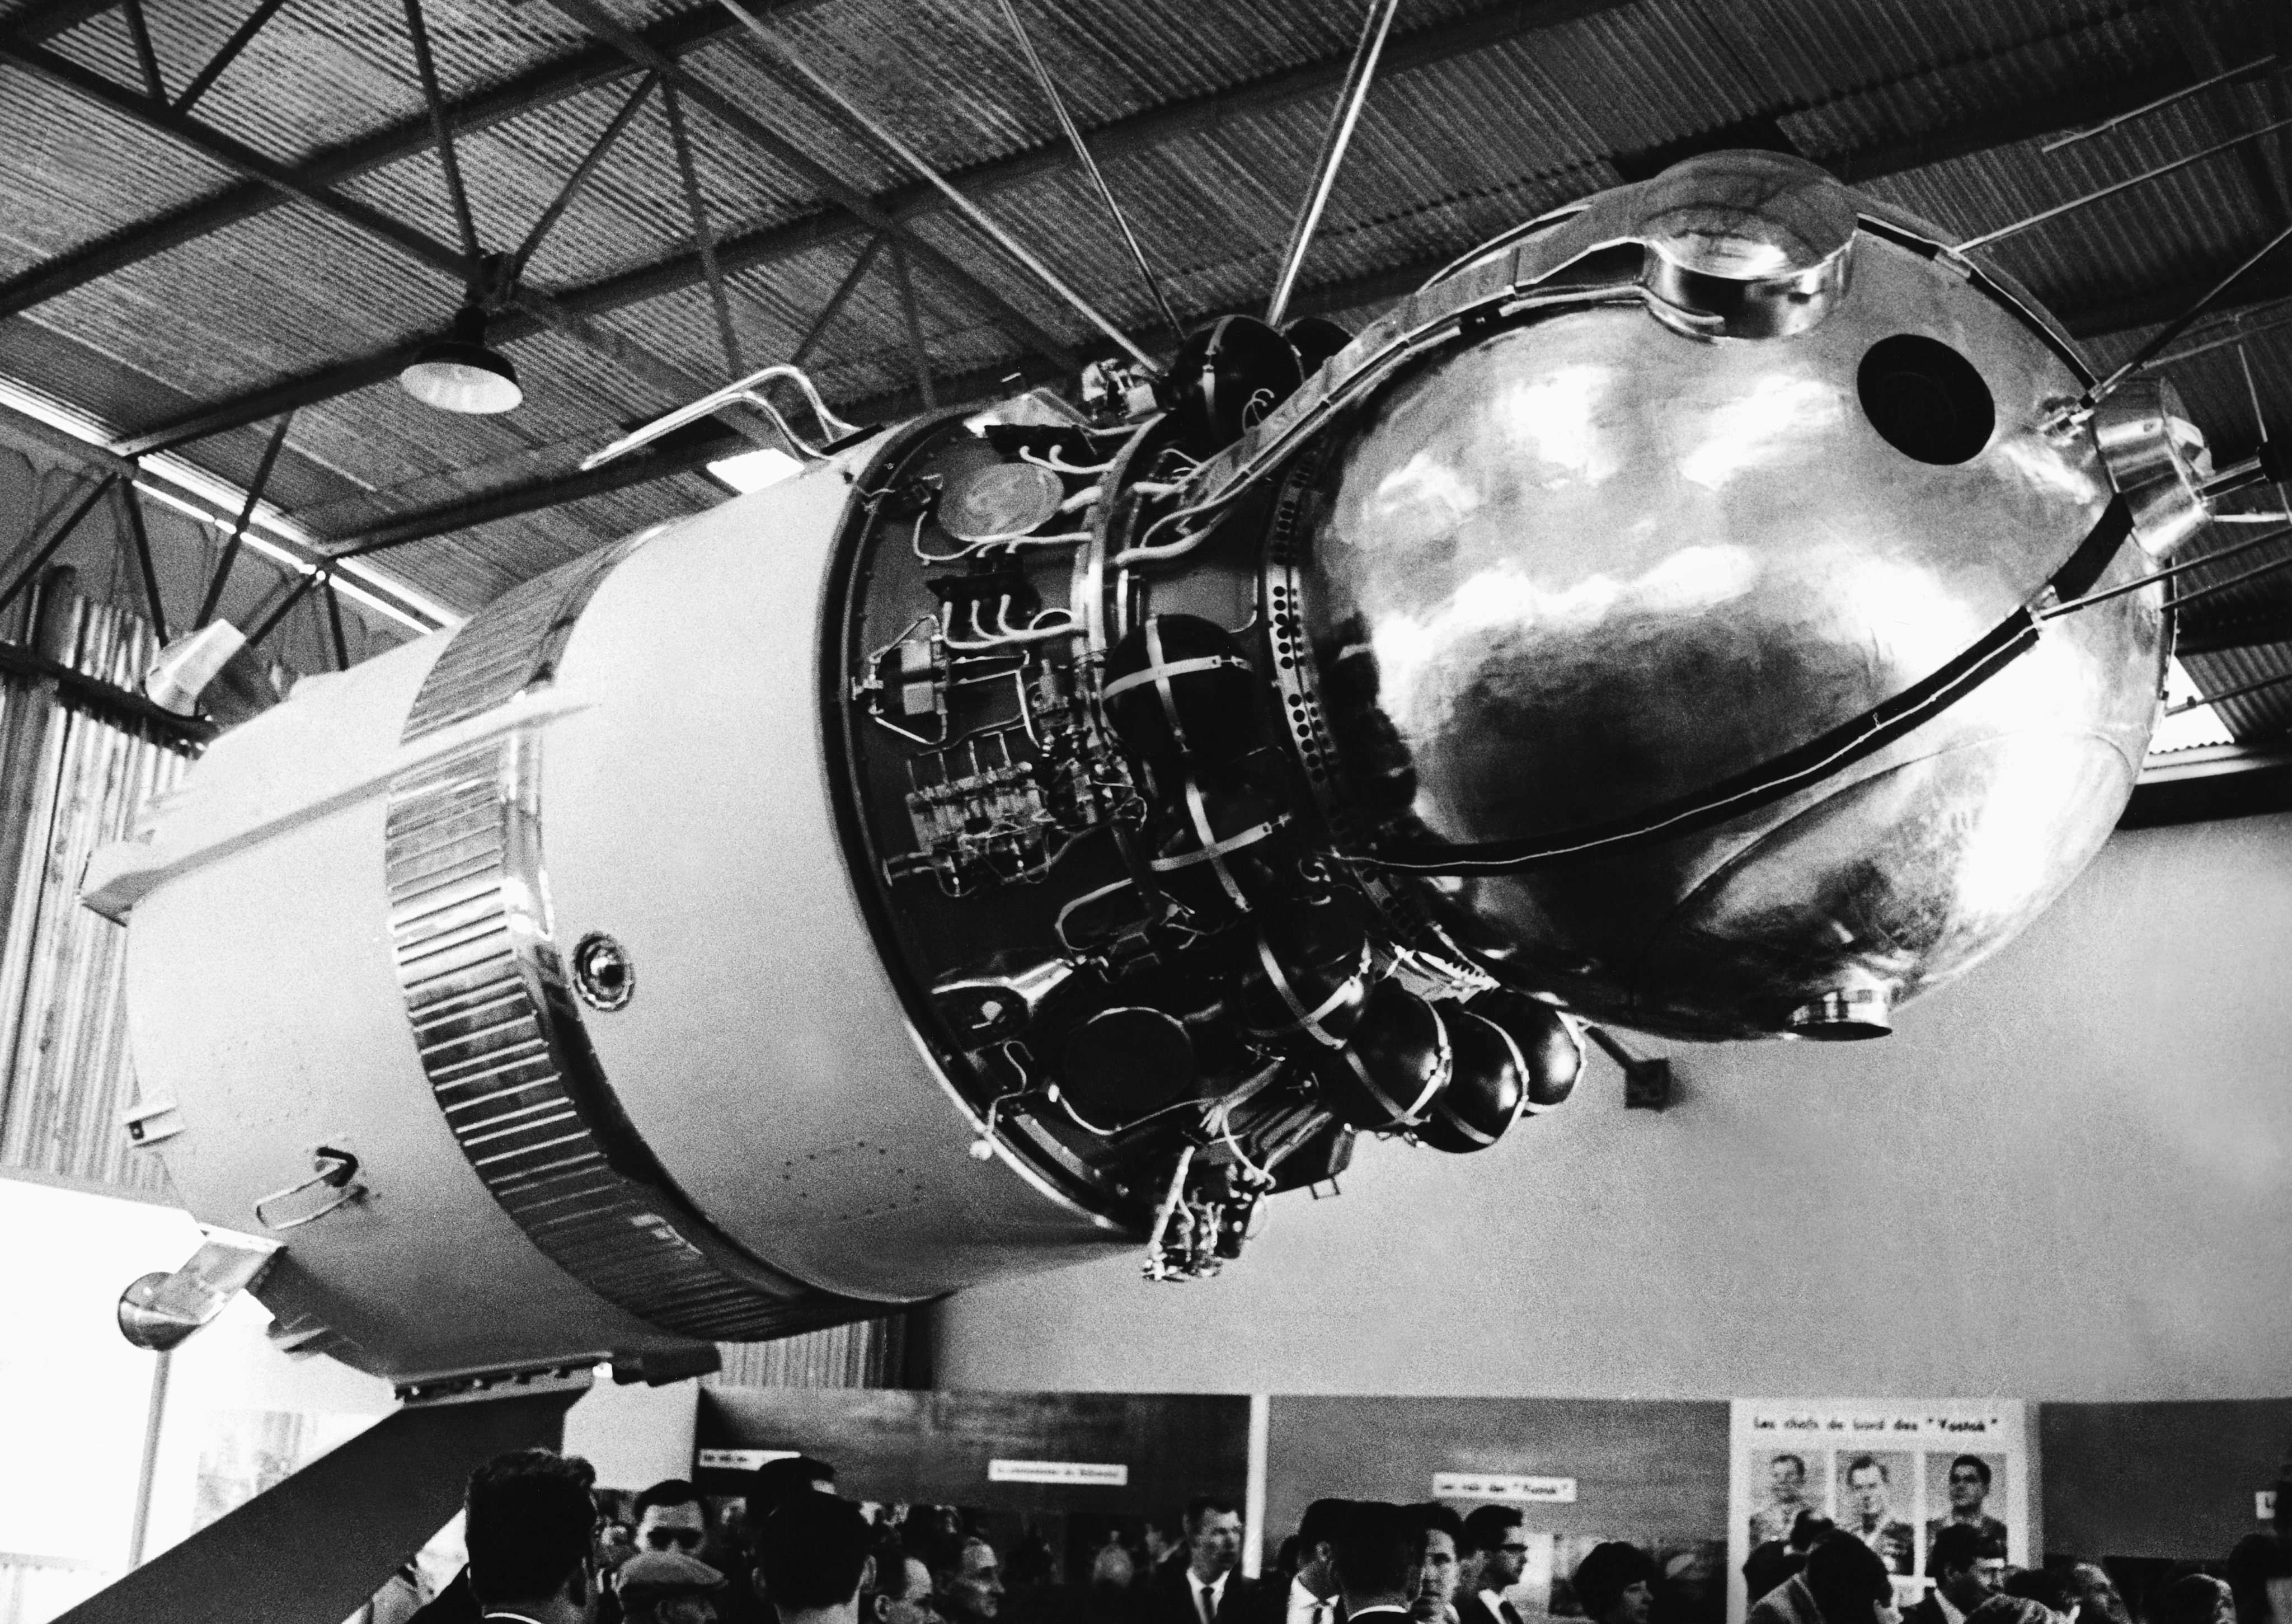 Vostok I, The Space Shuttle Used By Yuri Gagarin